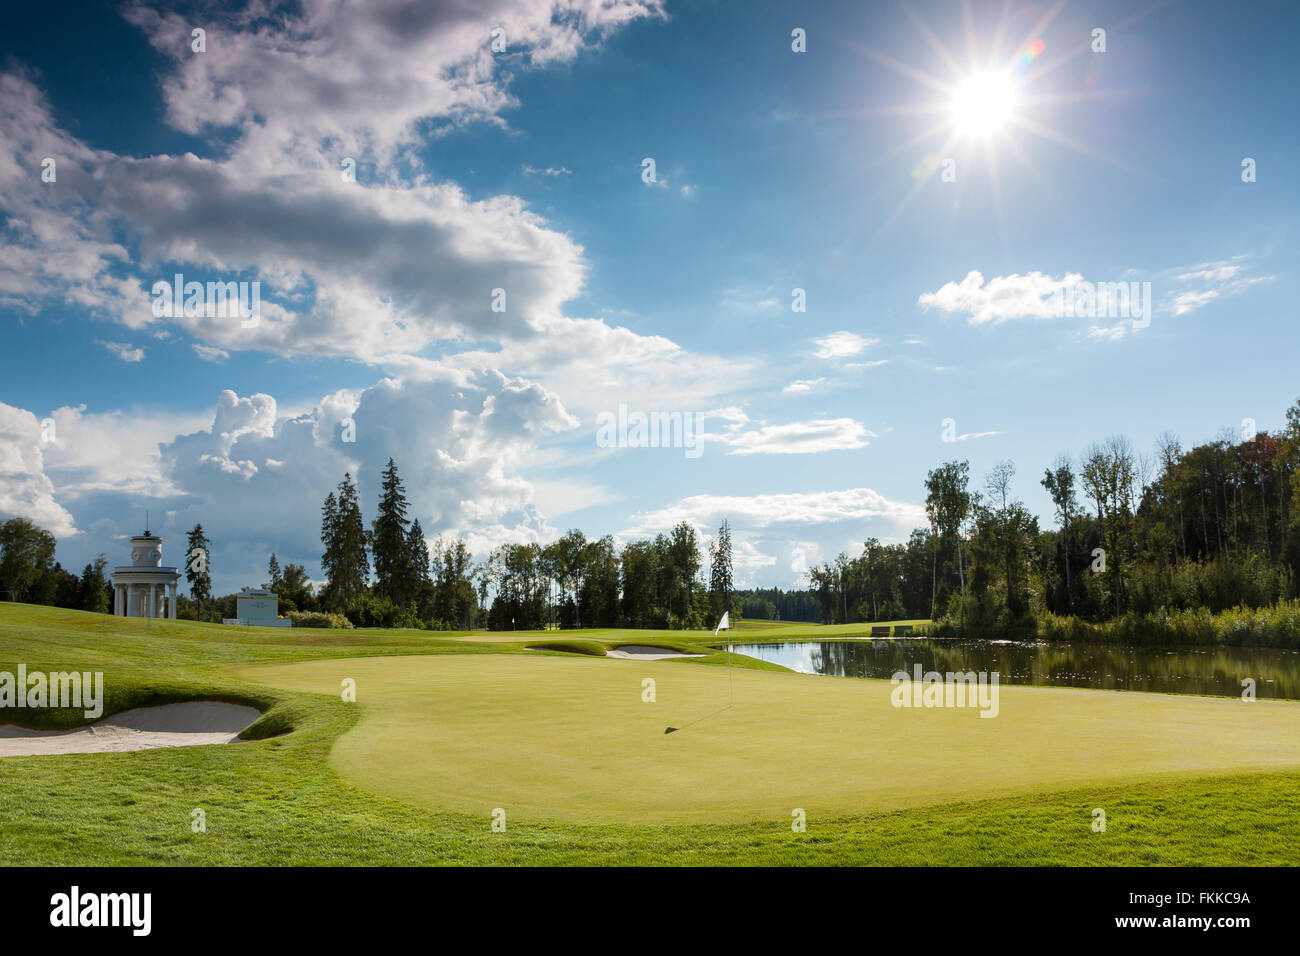 The sun shining over a golf course lined with buildings and trees Stock Photo